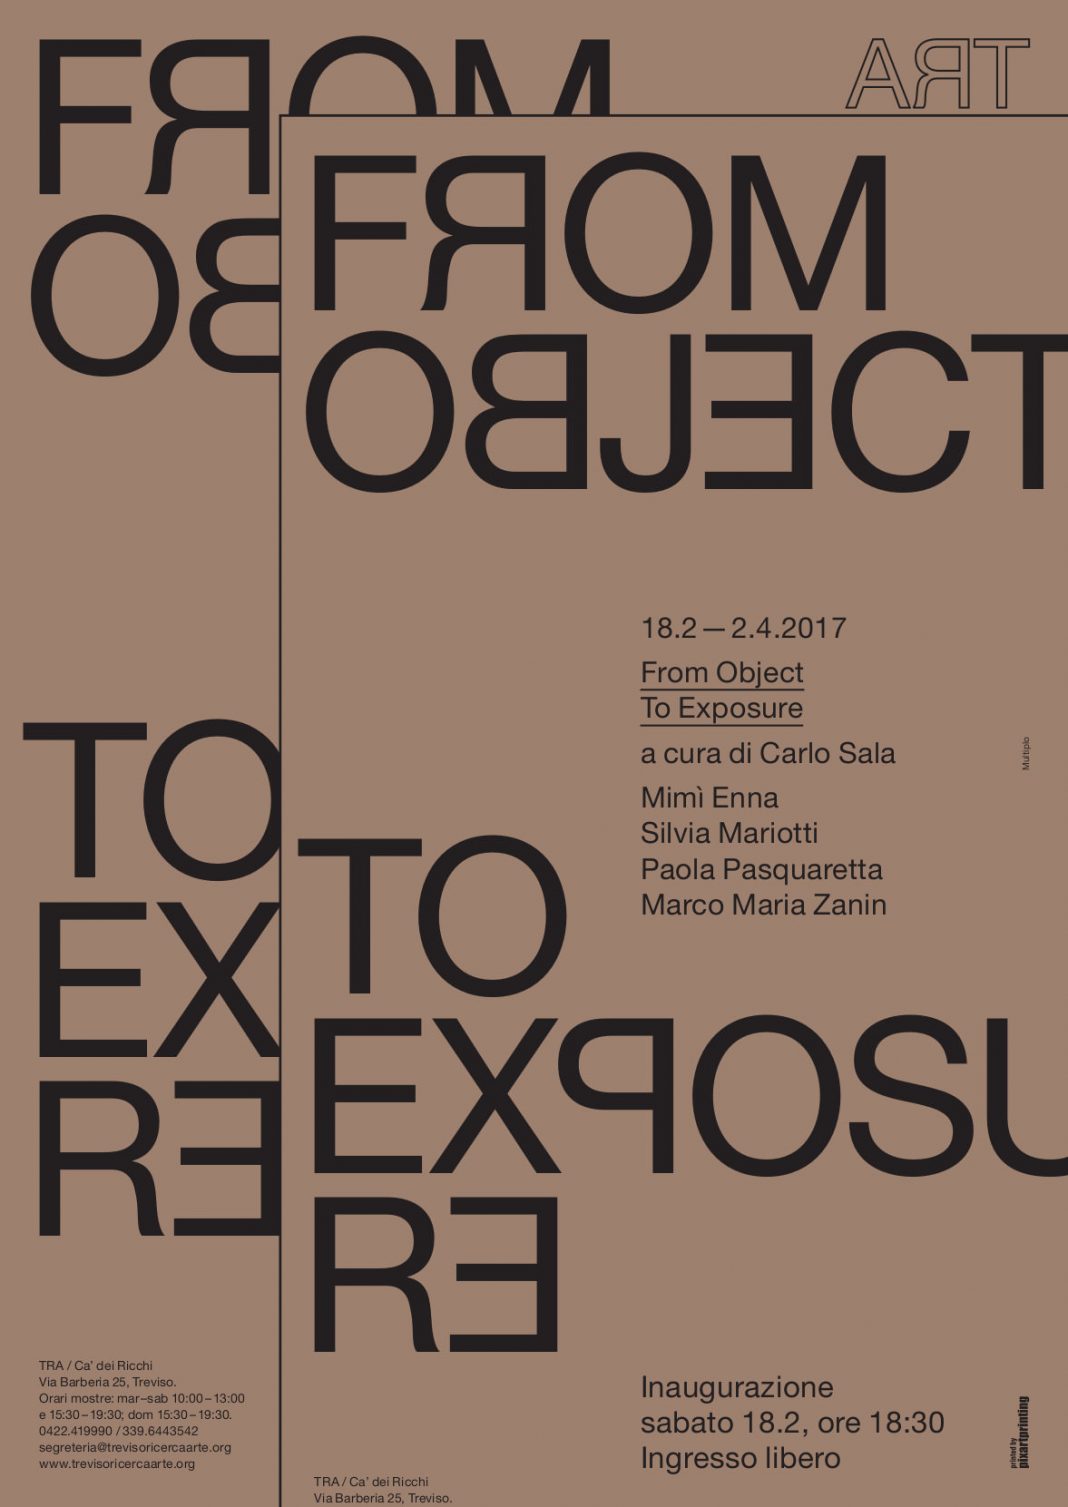 From object to exposurehttps://www.exibart.com/repository/media/eventi/2017/02/from-object-to-exposure-1068x1507.jpg